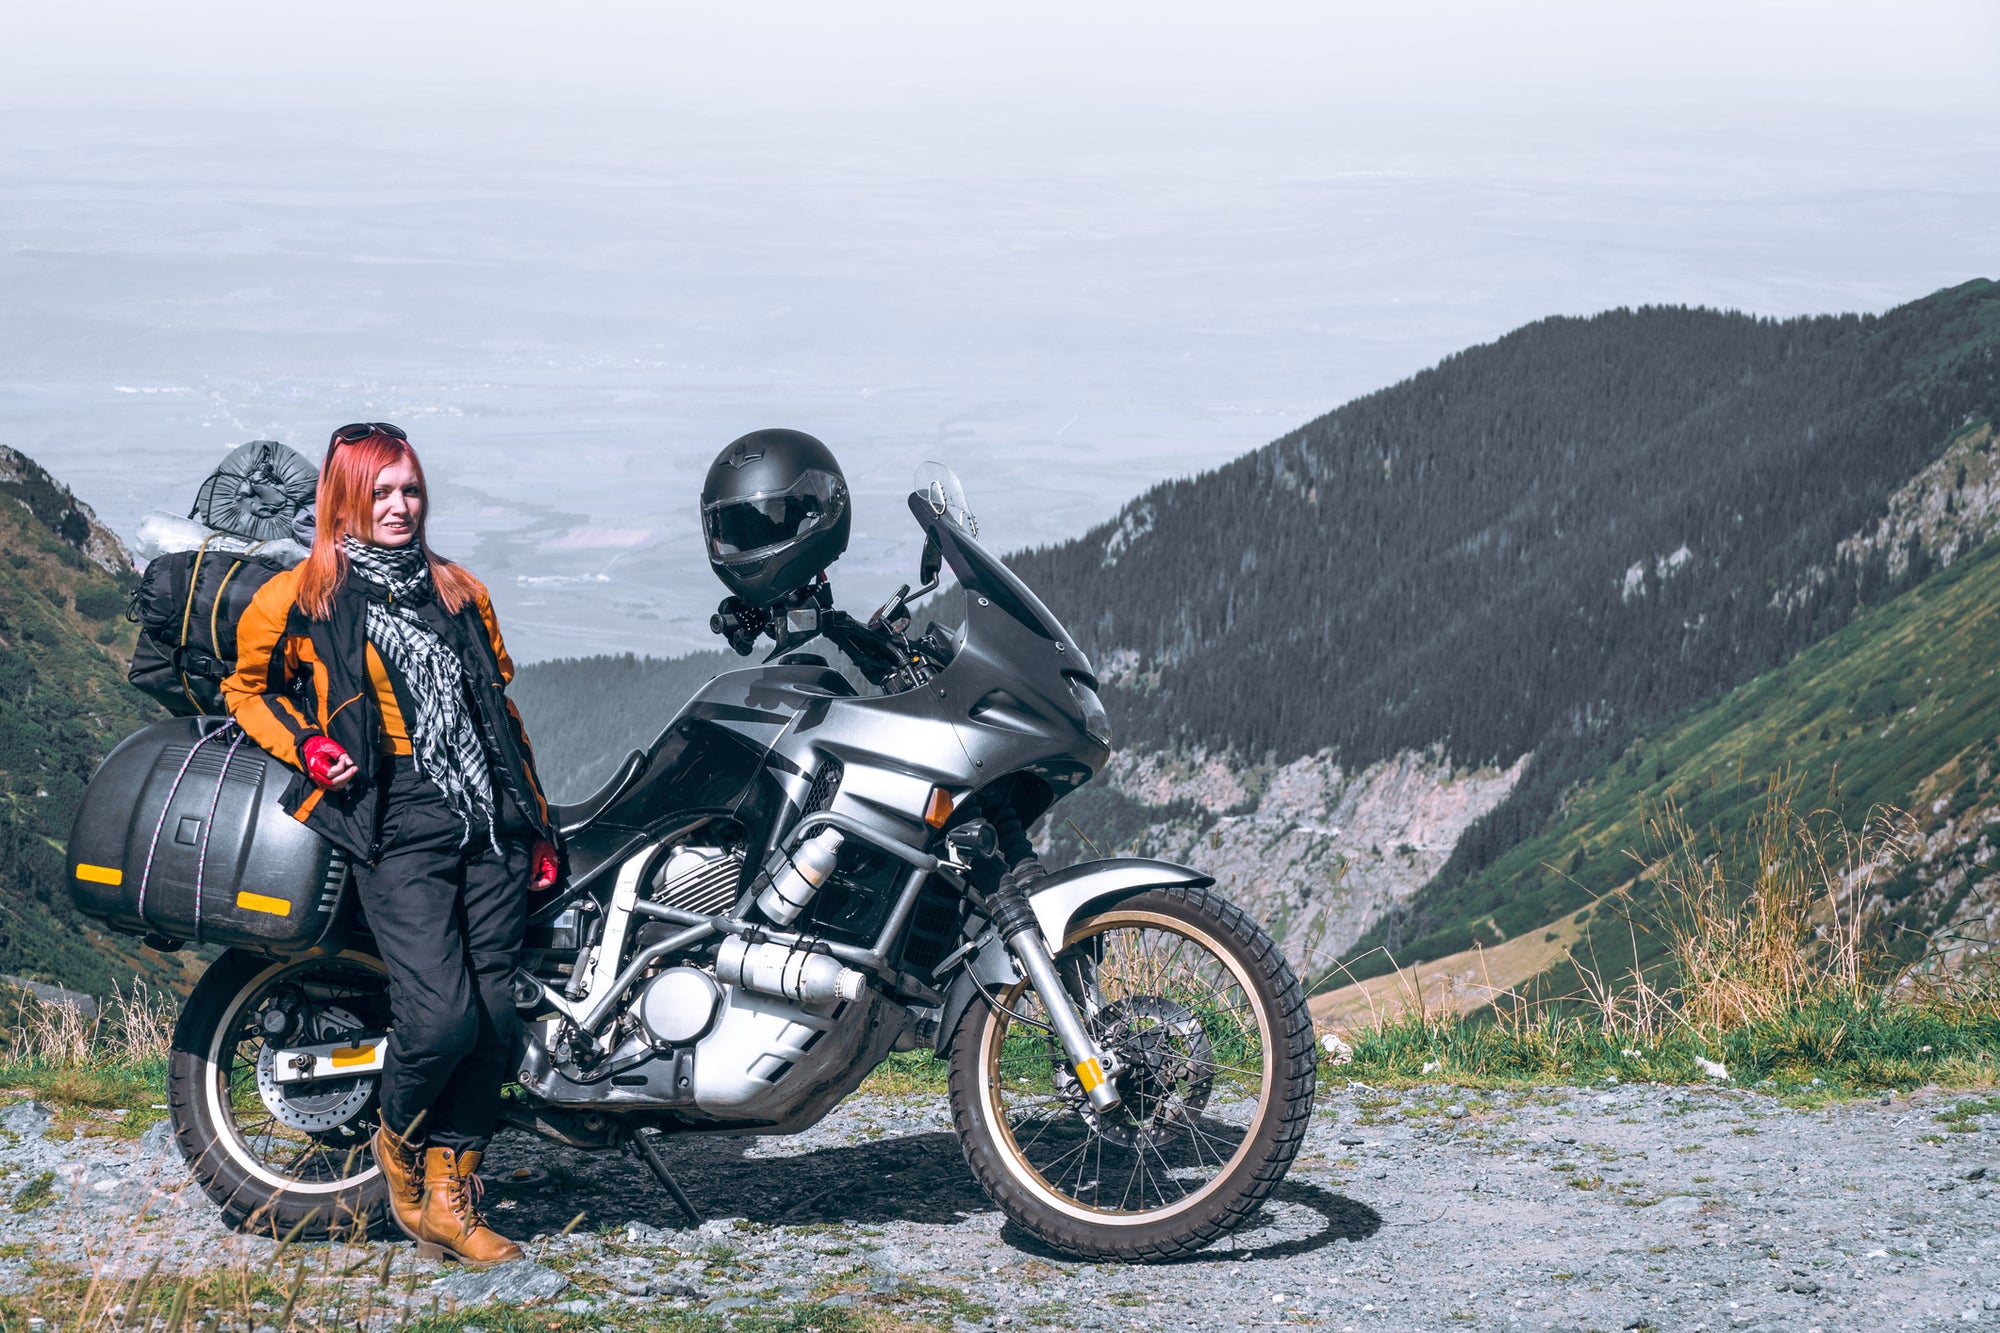 Planning an Epic Motorcycle Road Trip? Don’t Neglect the Essentials